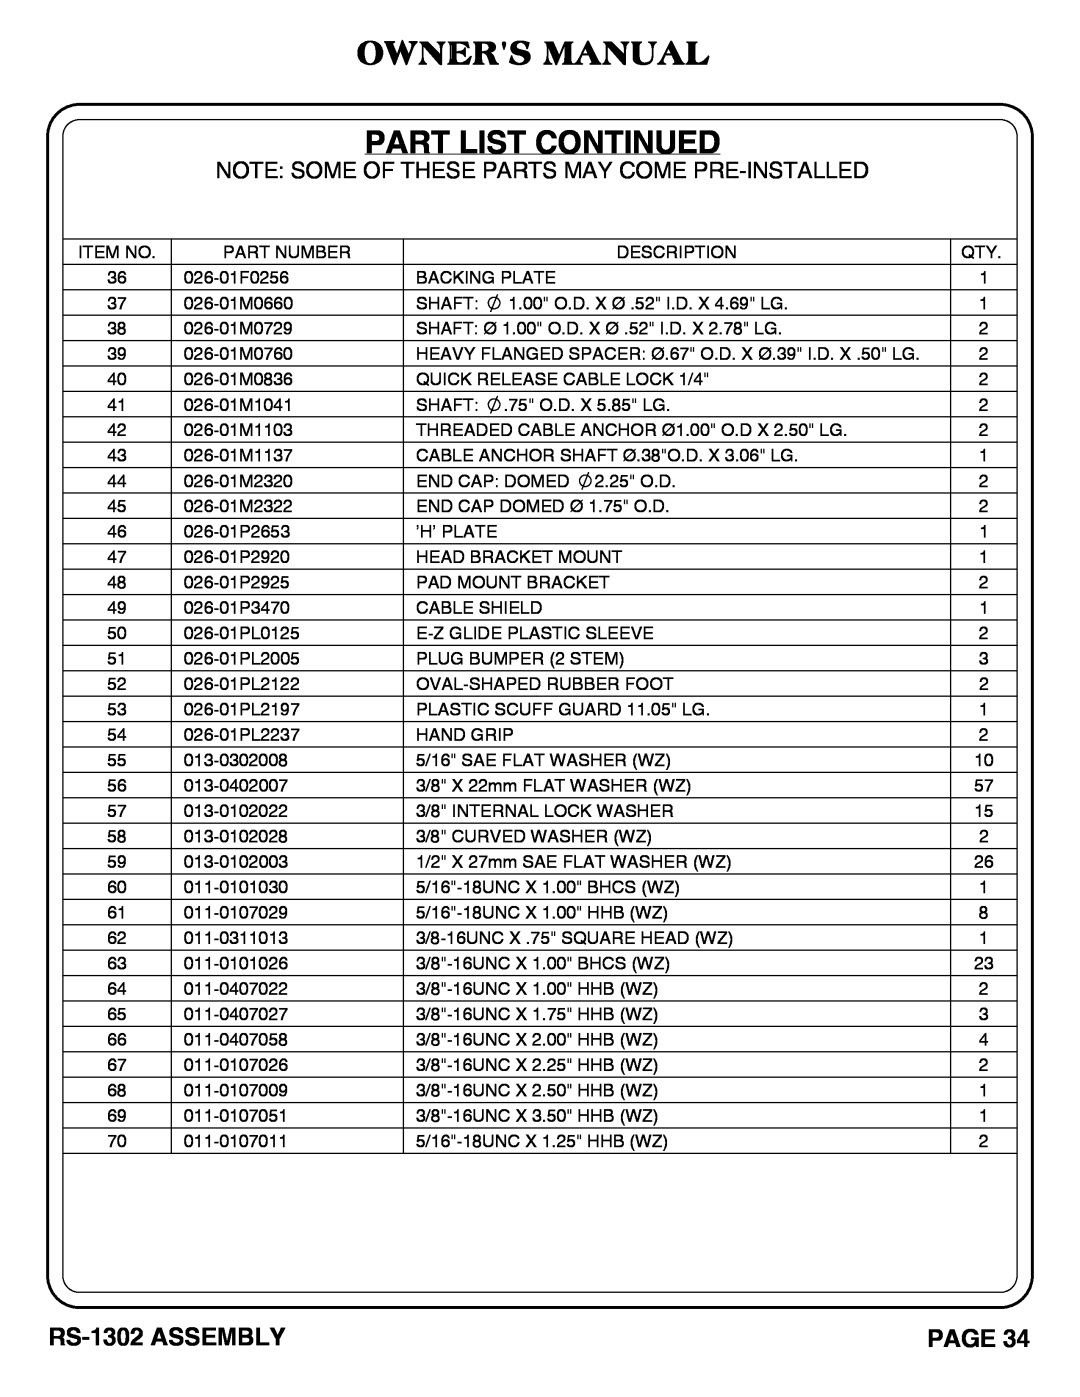 Hoist Fitness owner manual Owners Manual Part List Continued, RS-1302 ASSEMBLY, Page 